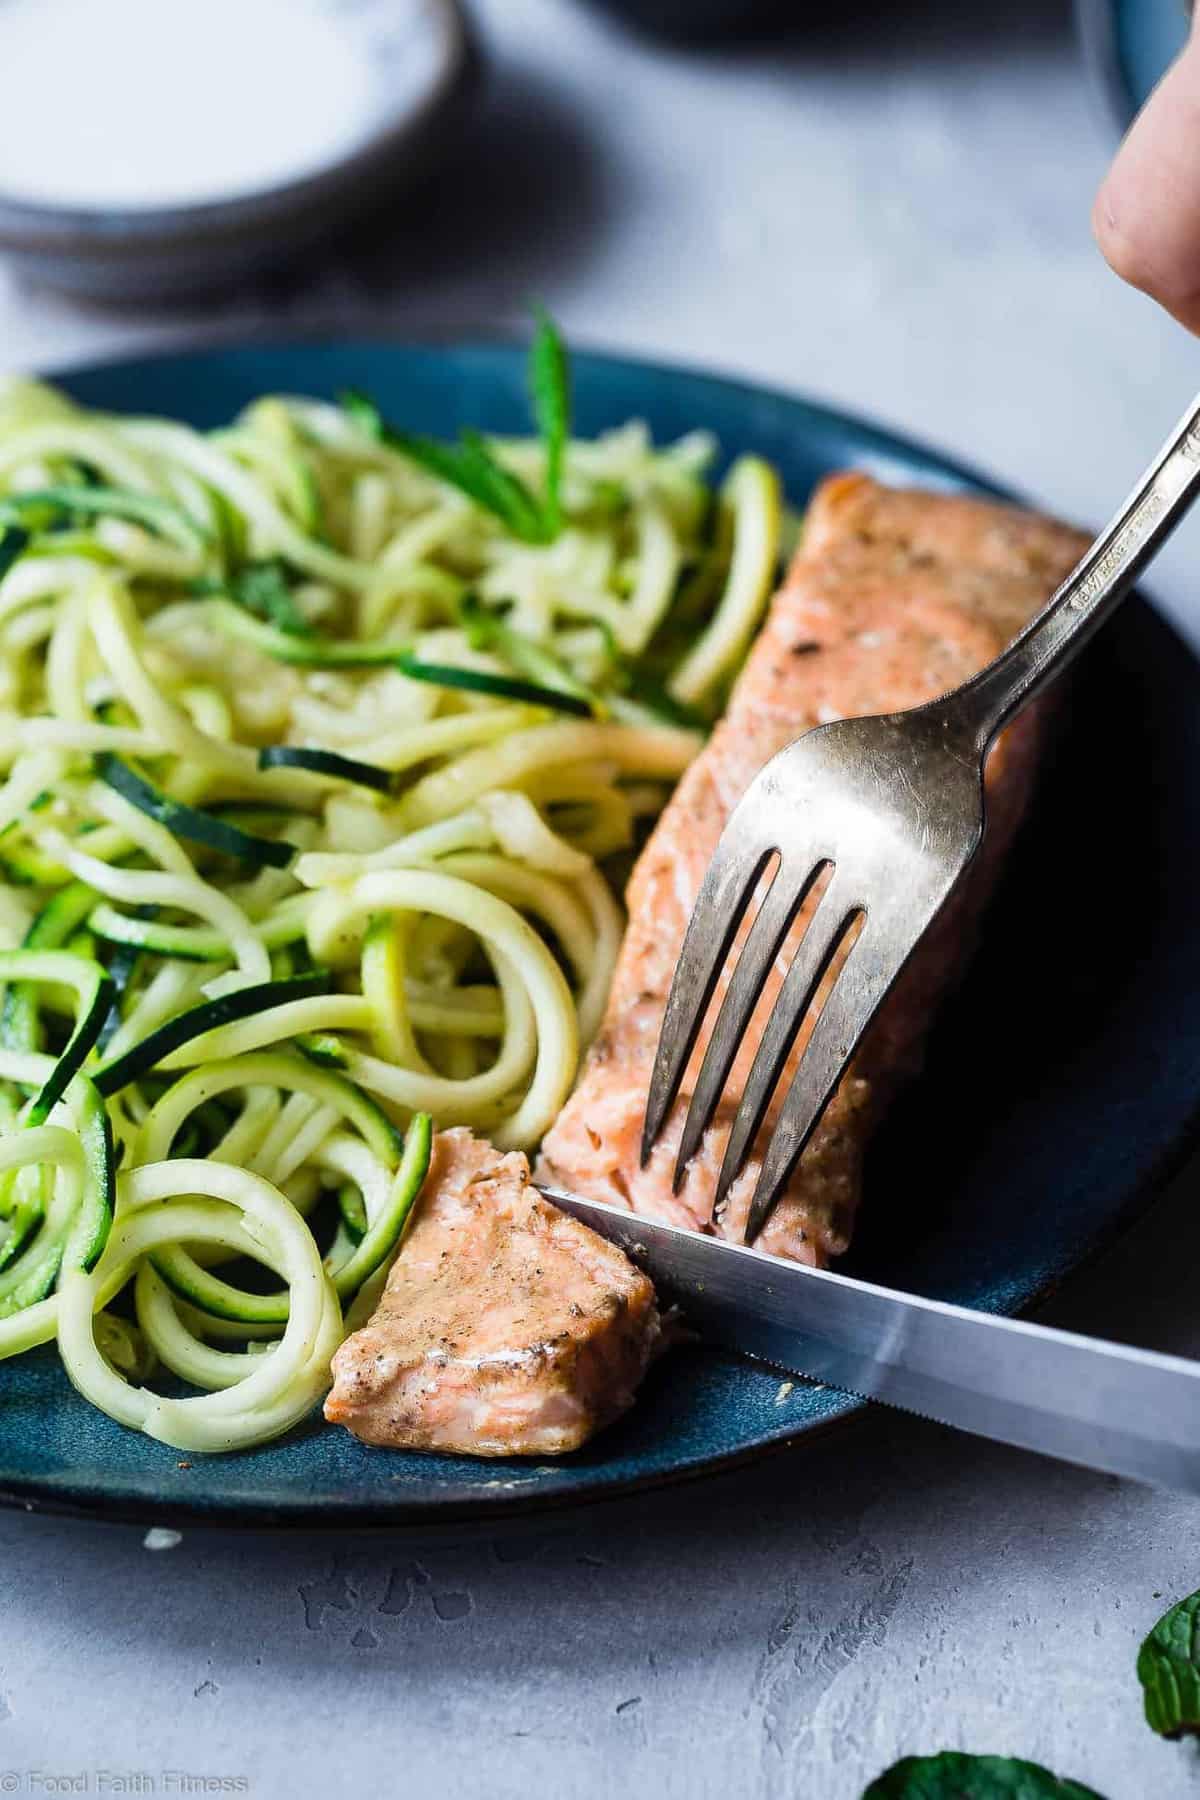 Whole30 Salmon Curry Zucchini Noodles - A SUPER easy, 5-ingredient, healthy meal that is paleo, gluten free, low carb and whole30 compliant! Perfect for busy weeknights! | #Foodfaithfitness | #Paleo #Lowcarb #Whole30 #Healthy #Keto